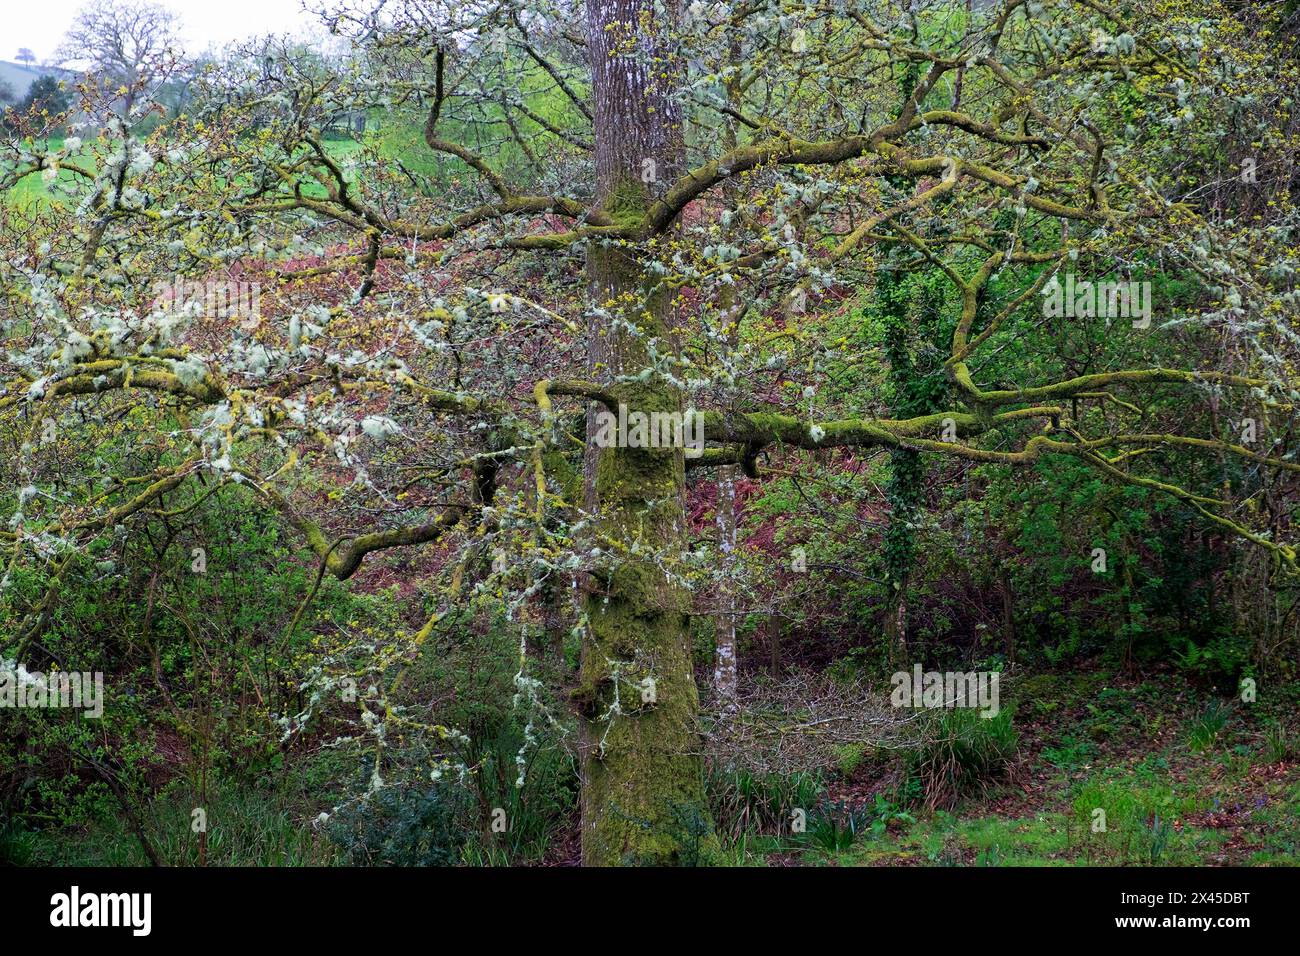 Old oak tree covered in moss ivy grey lichens  in rural Welsh countryside WALES UK KATHY DEWITT Stock Photo